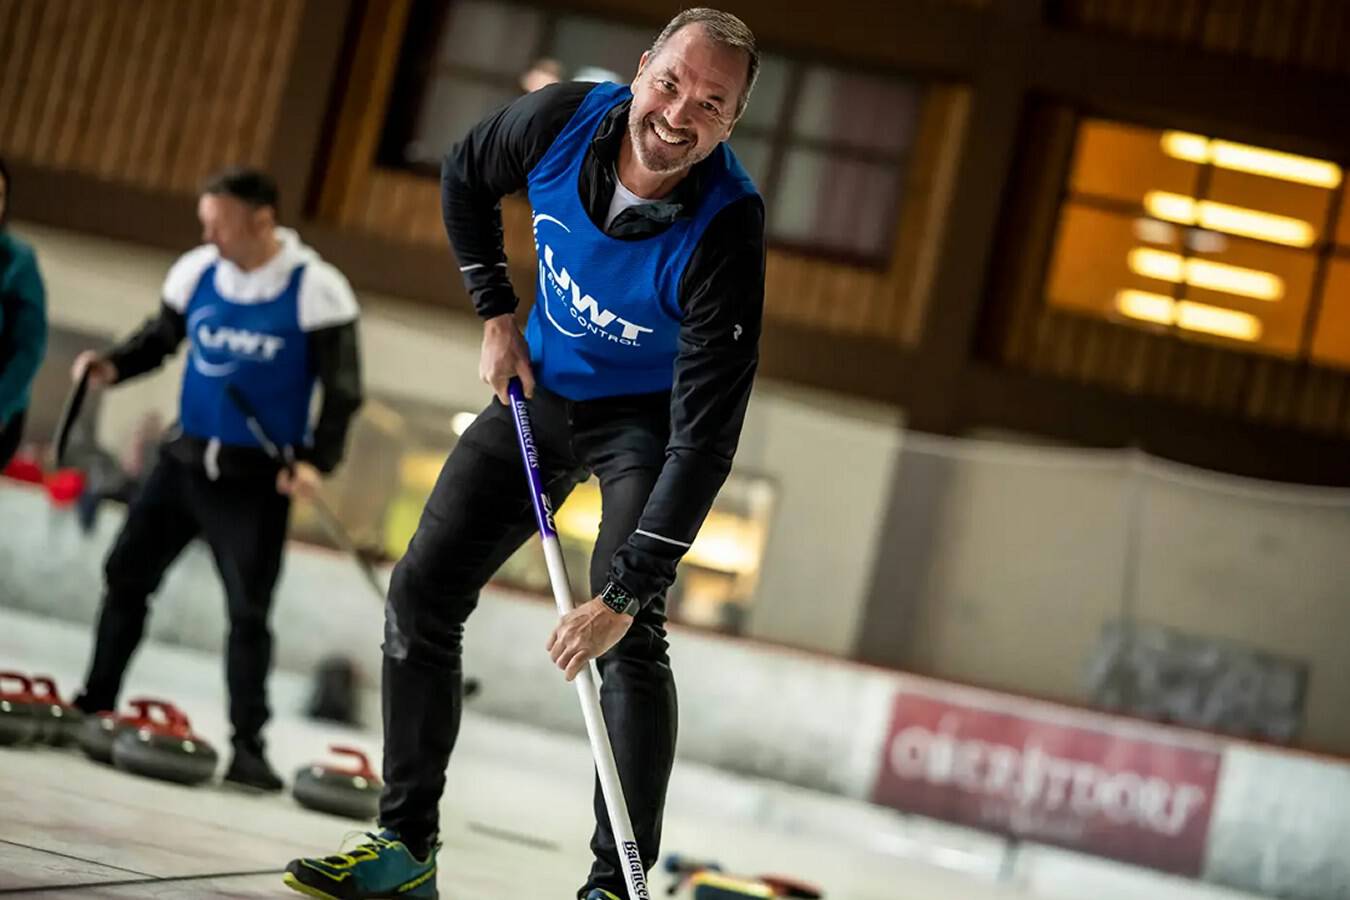 Curling for a good cause